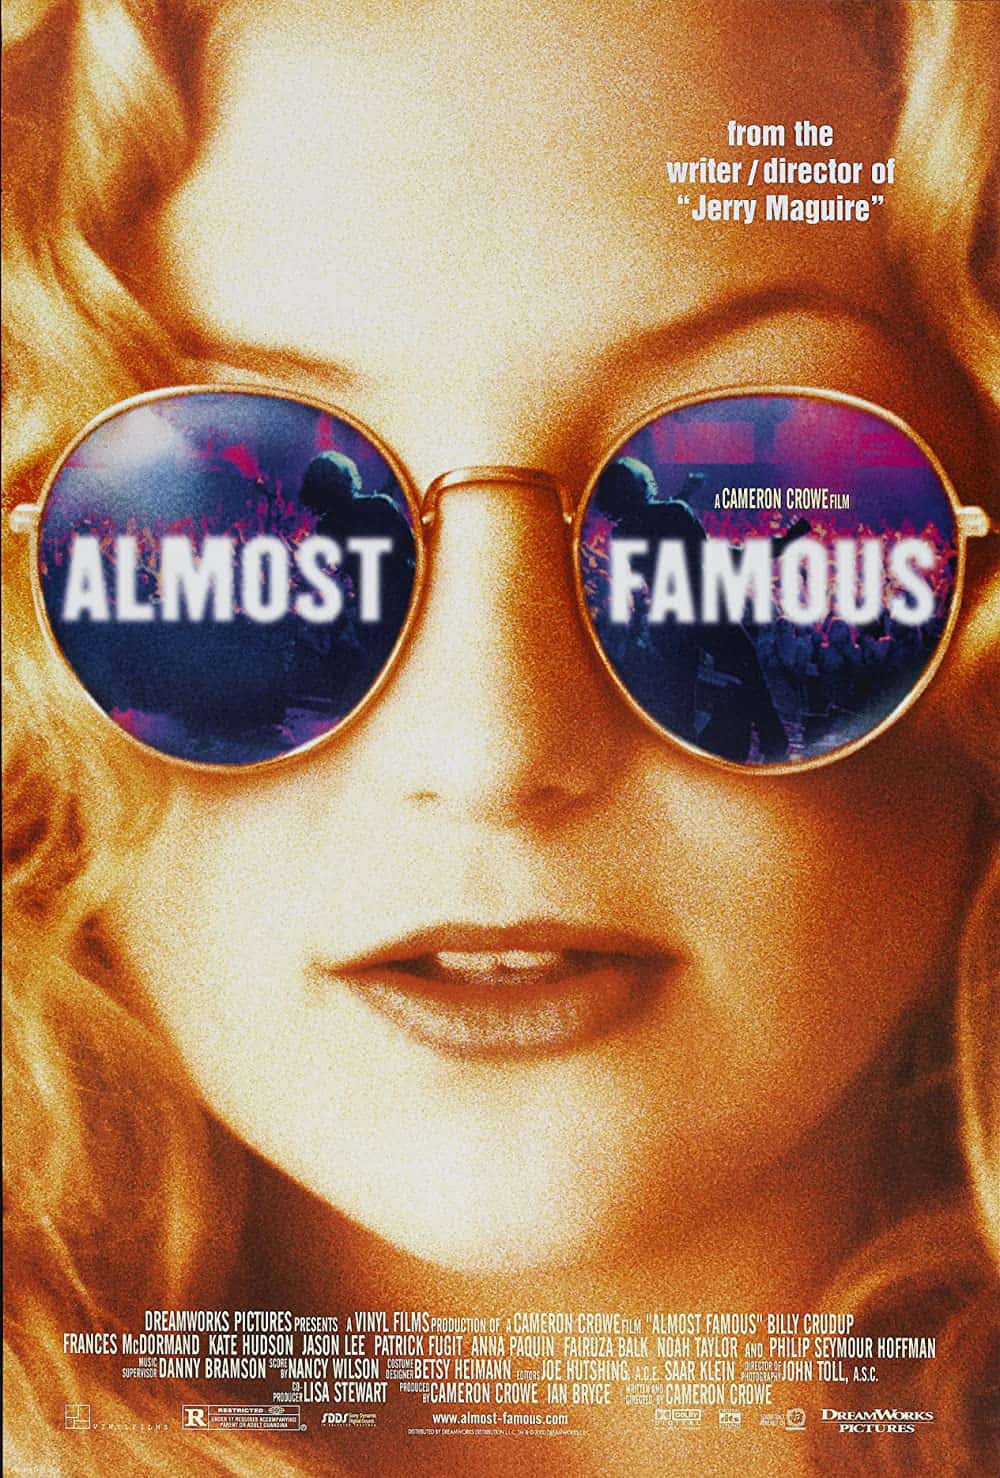 Movies You Gotta See: ‘Almost Famous’ is an essential friendship film